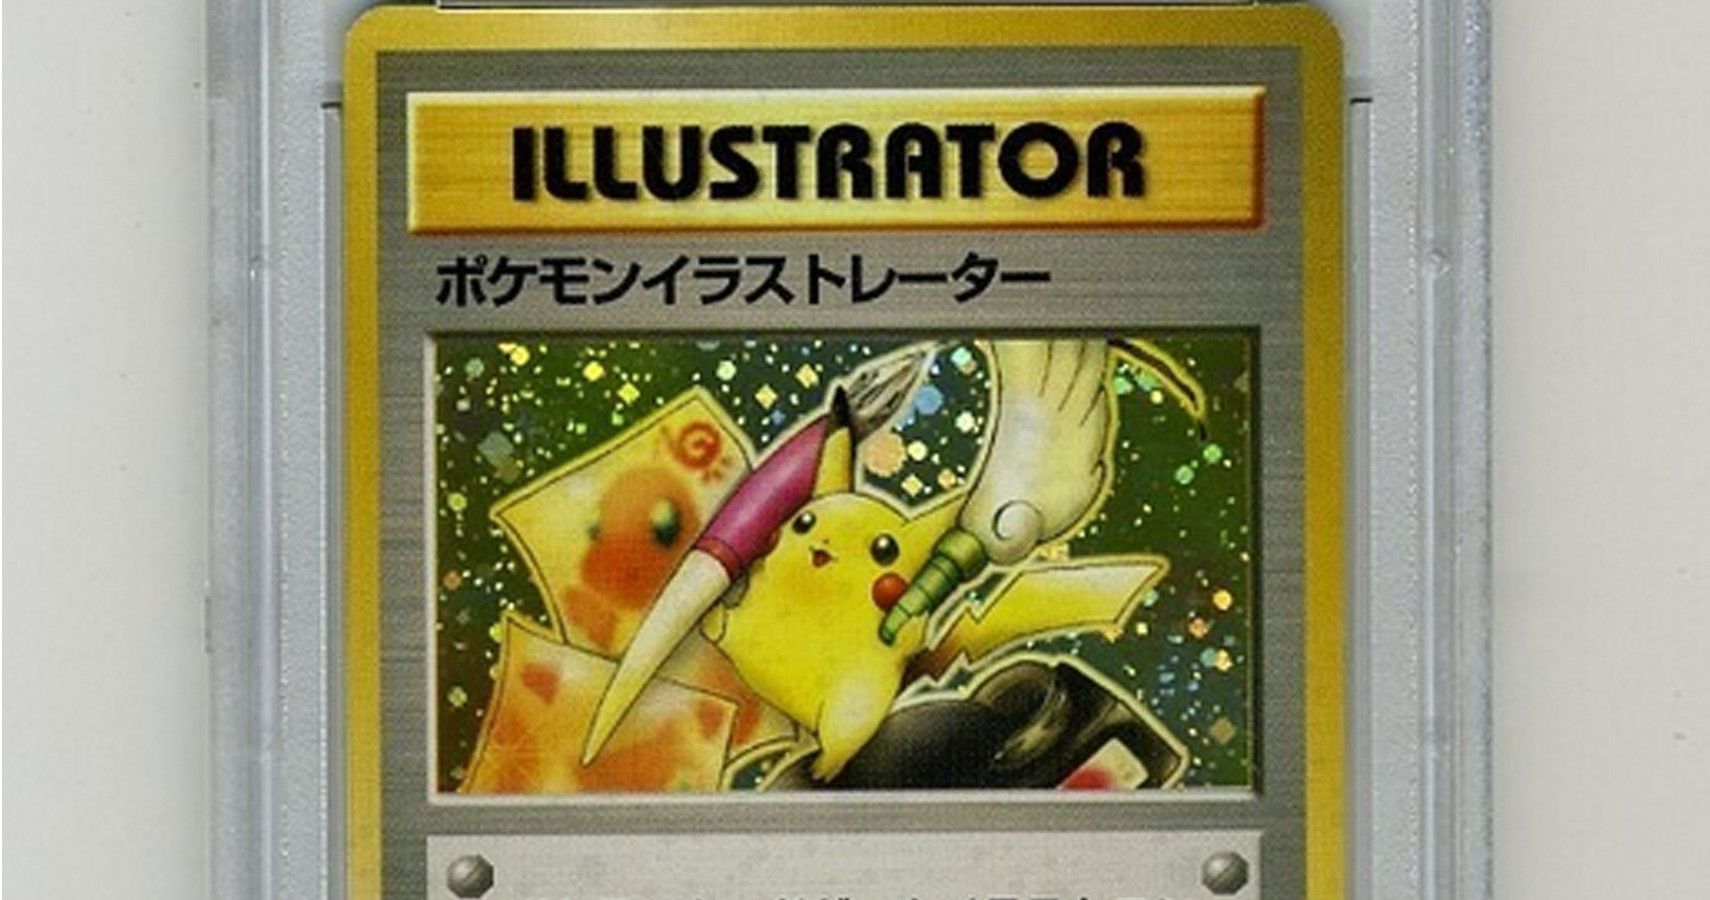 $900,000 Pikachu Illustrator sets new record for world's most